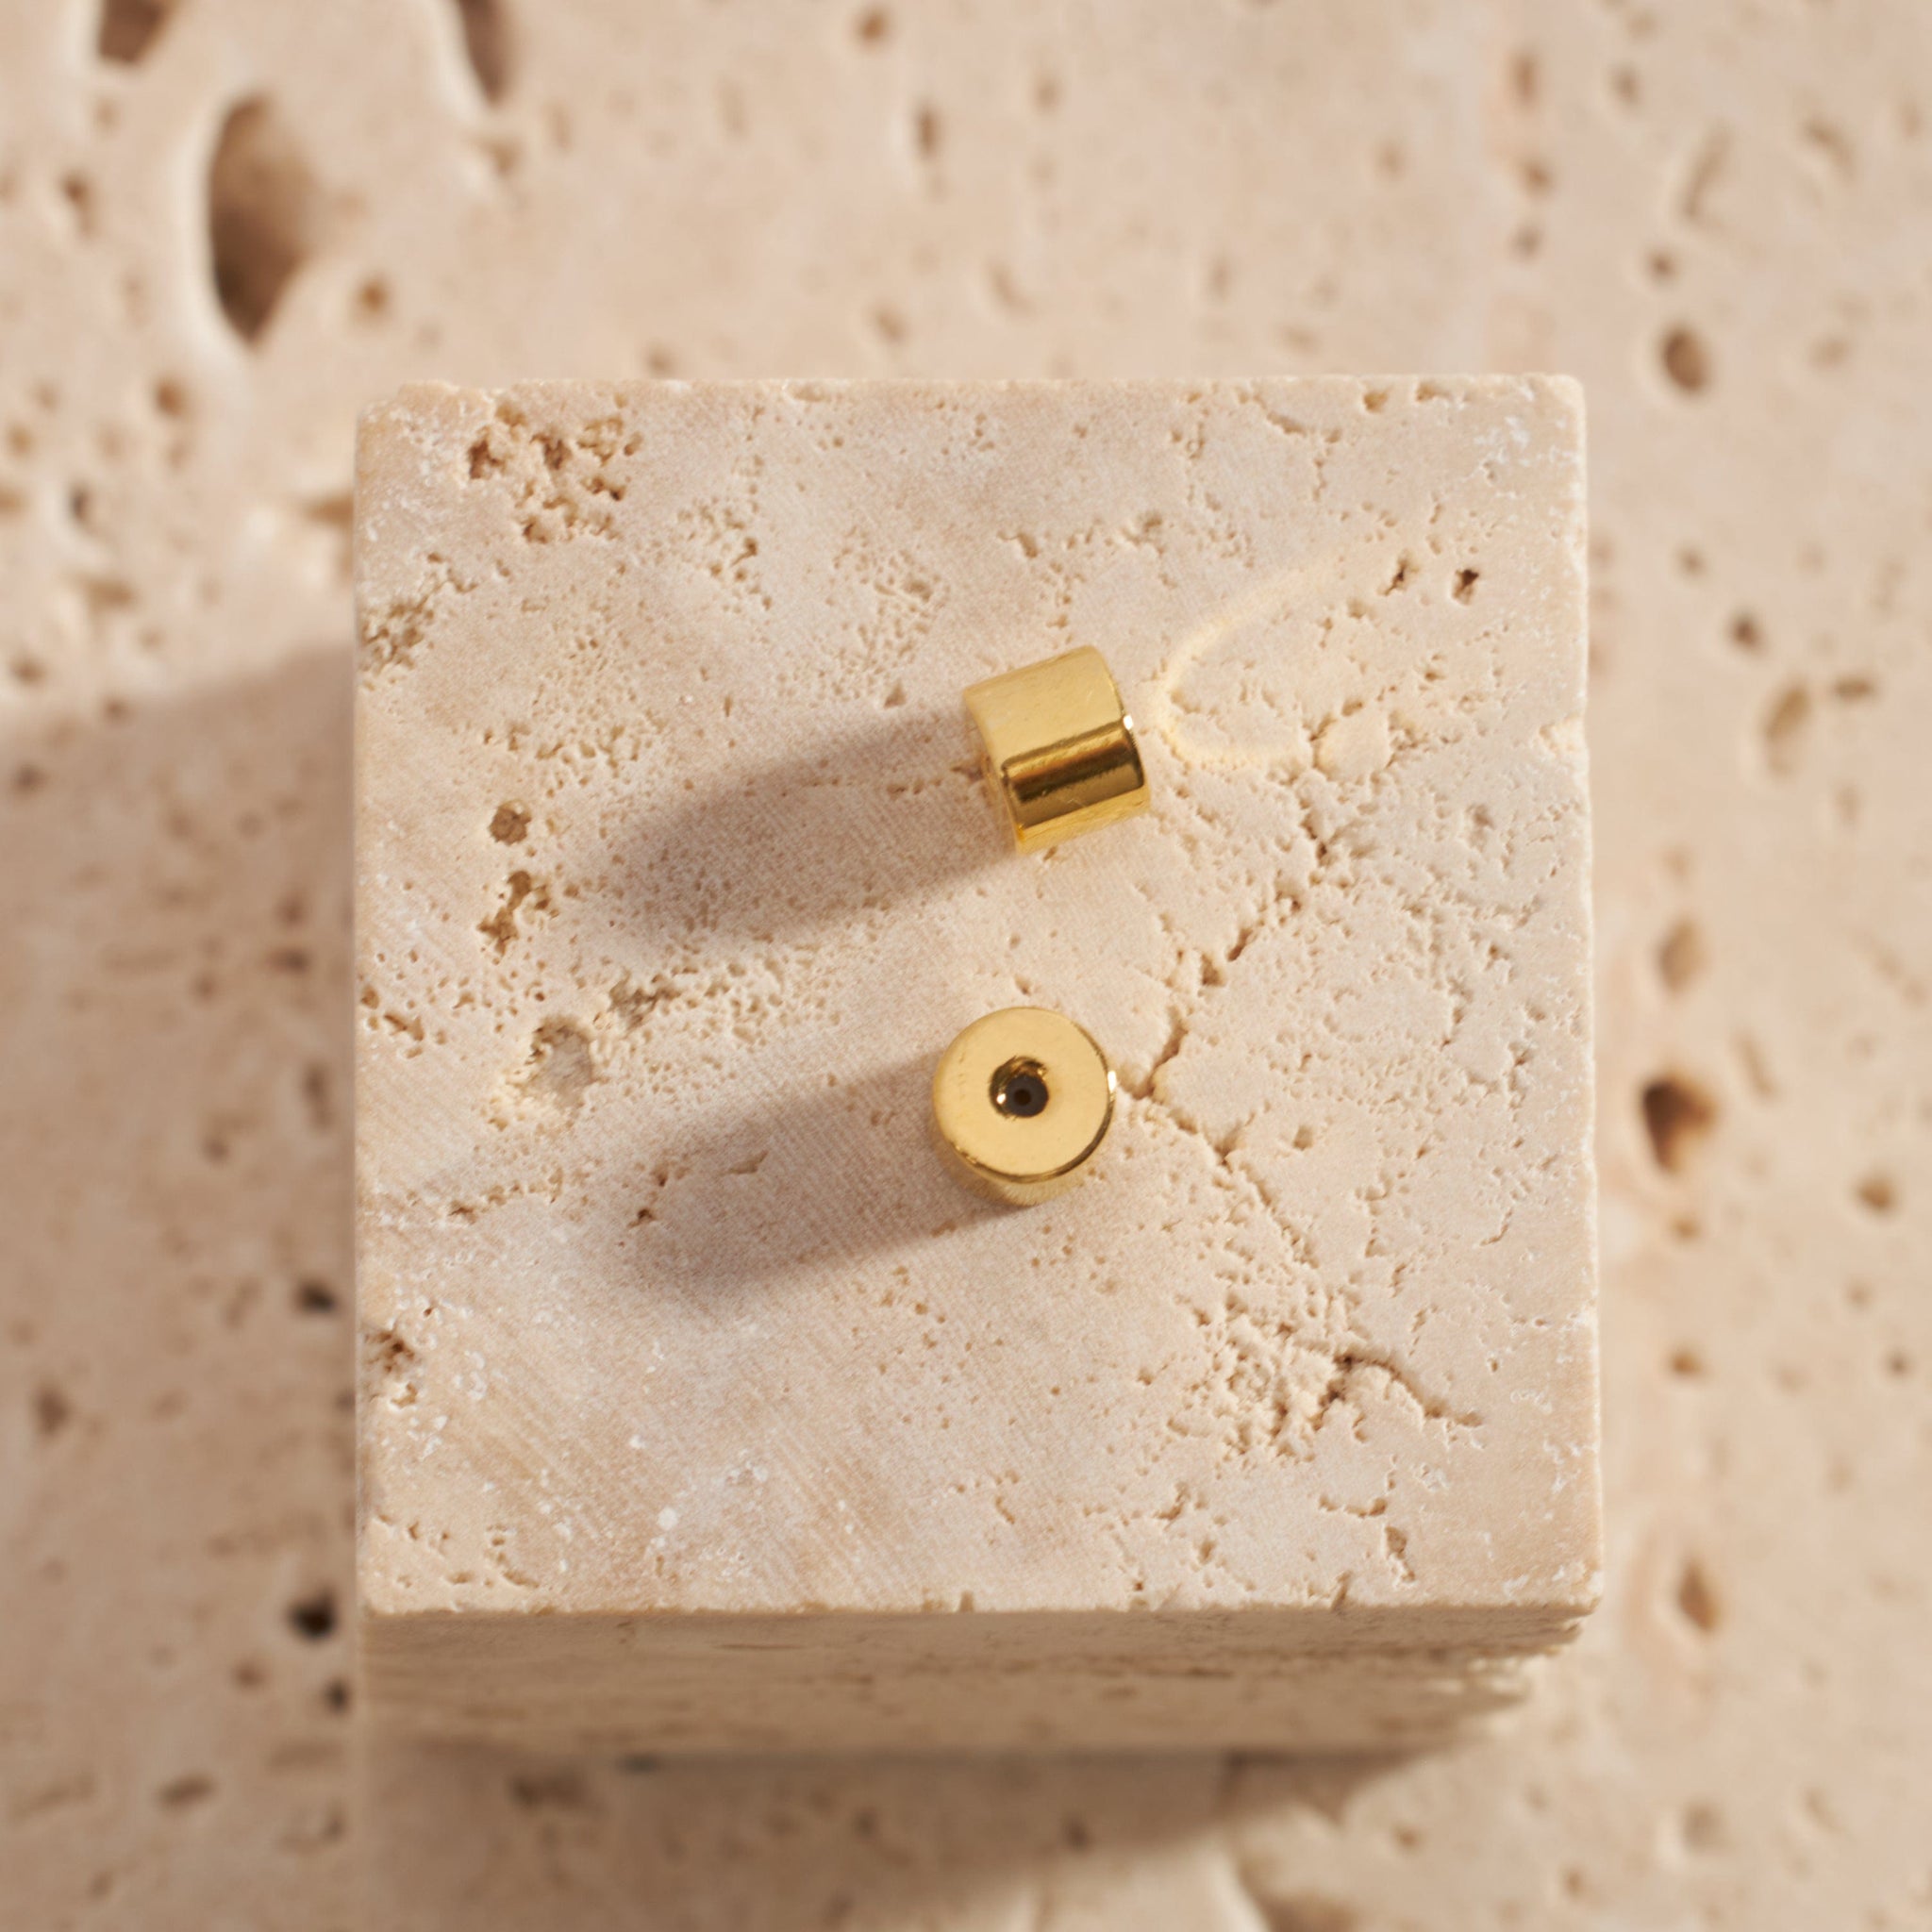 A pair of gold Perfect Backings is displayed on a stone block, one sitting on the flat side to show the snug closure while the other lays on its side to show the cylindrical shape. 